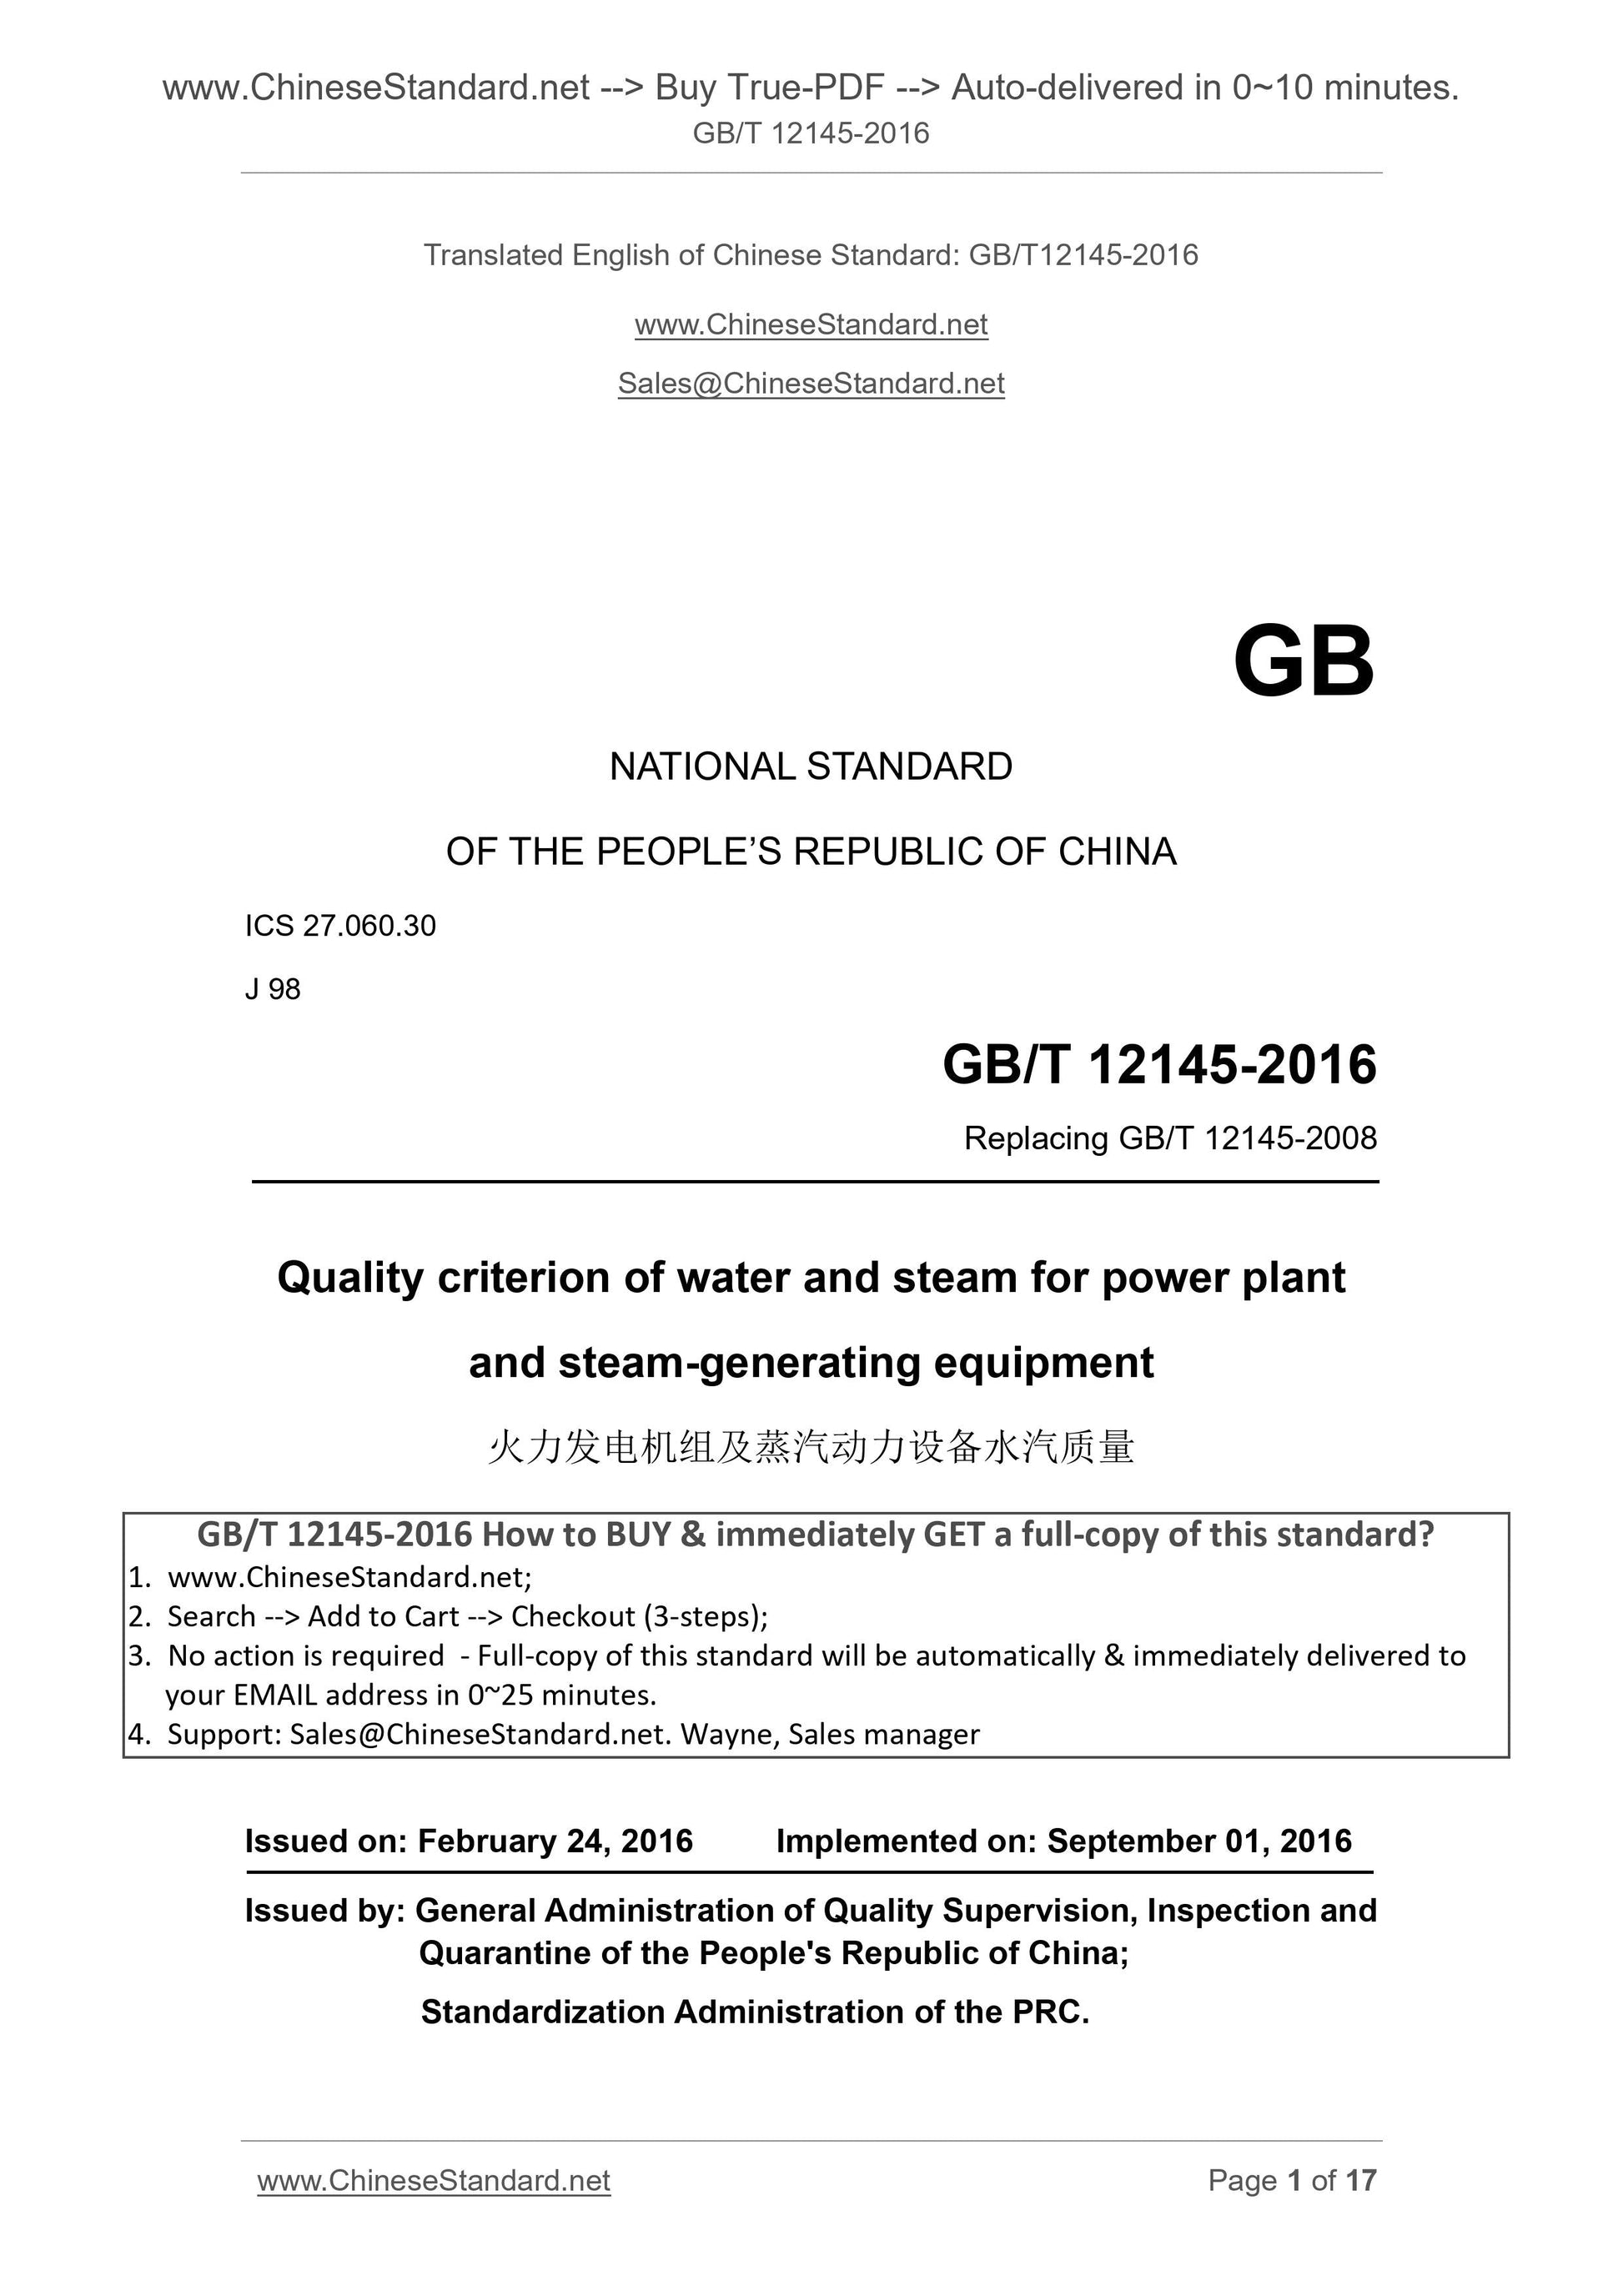 GB/T 12145-2016 Page 1